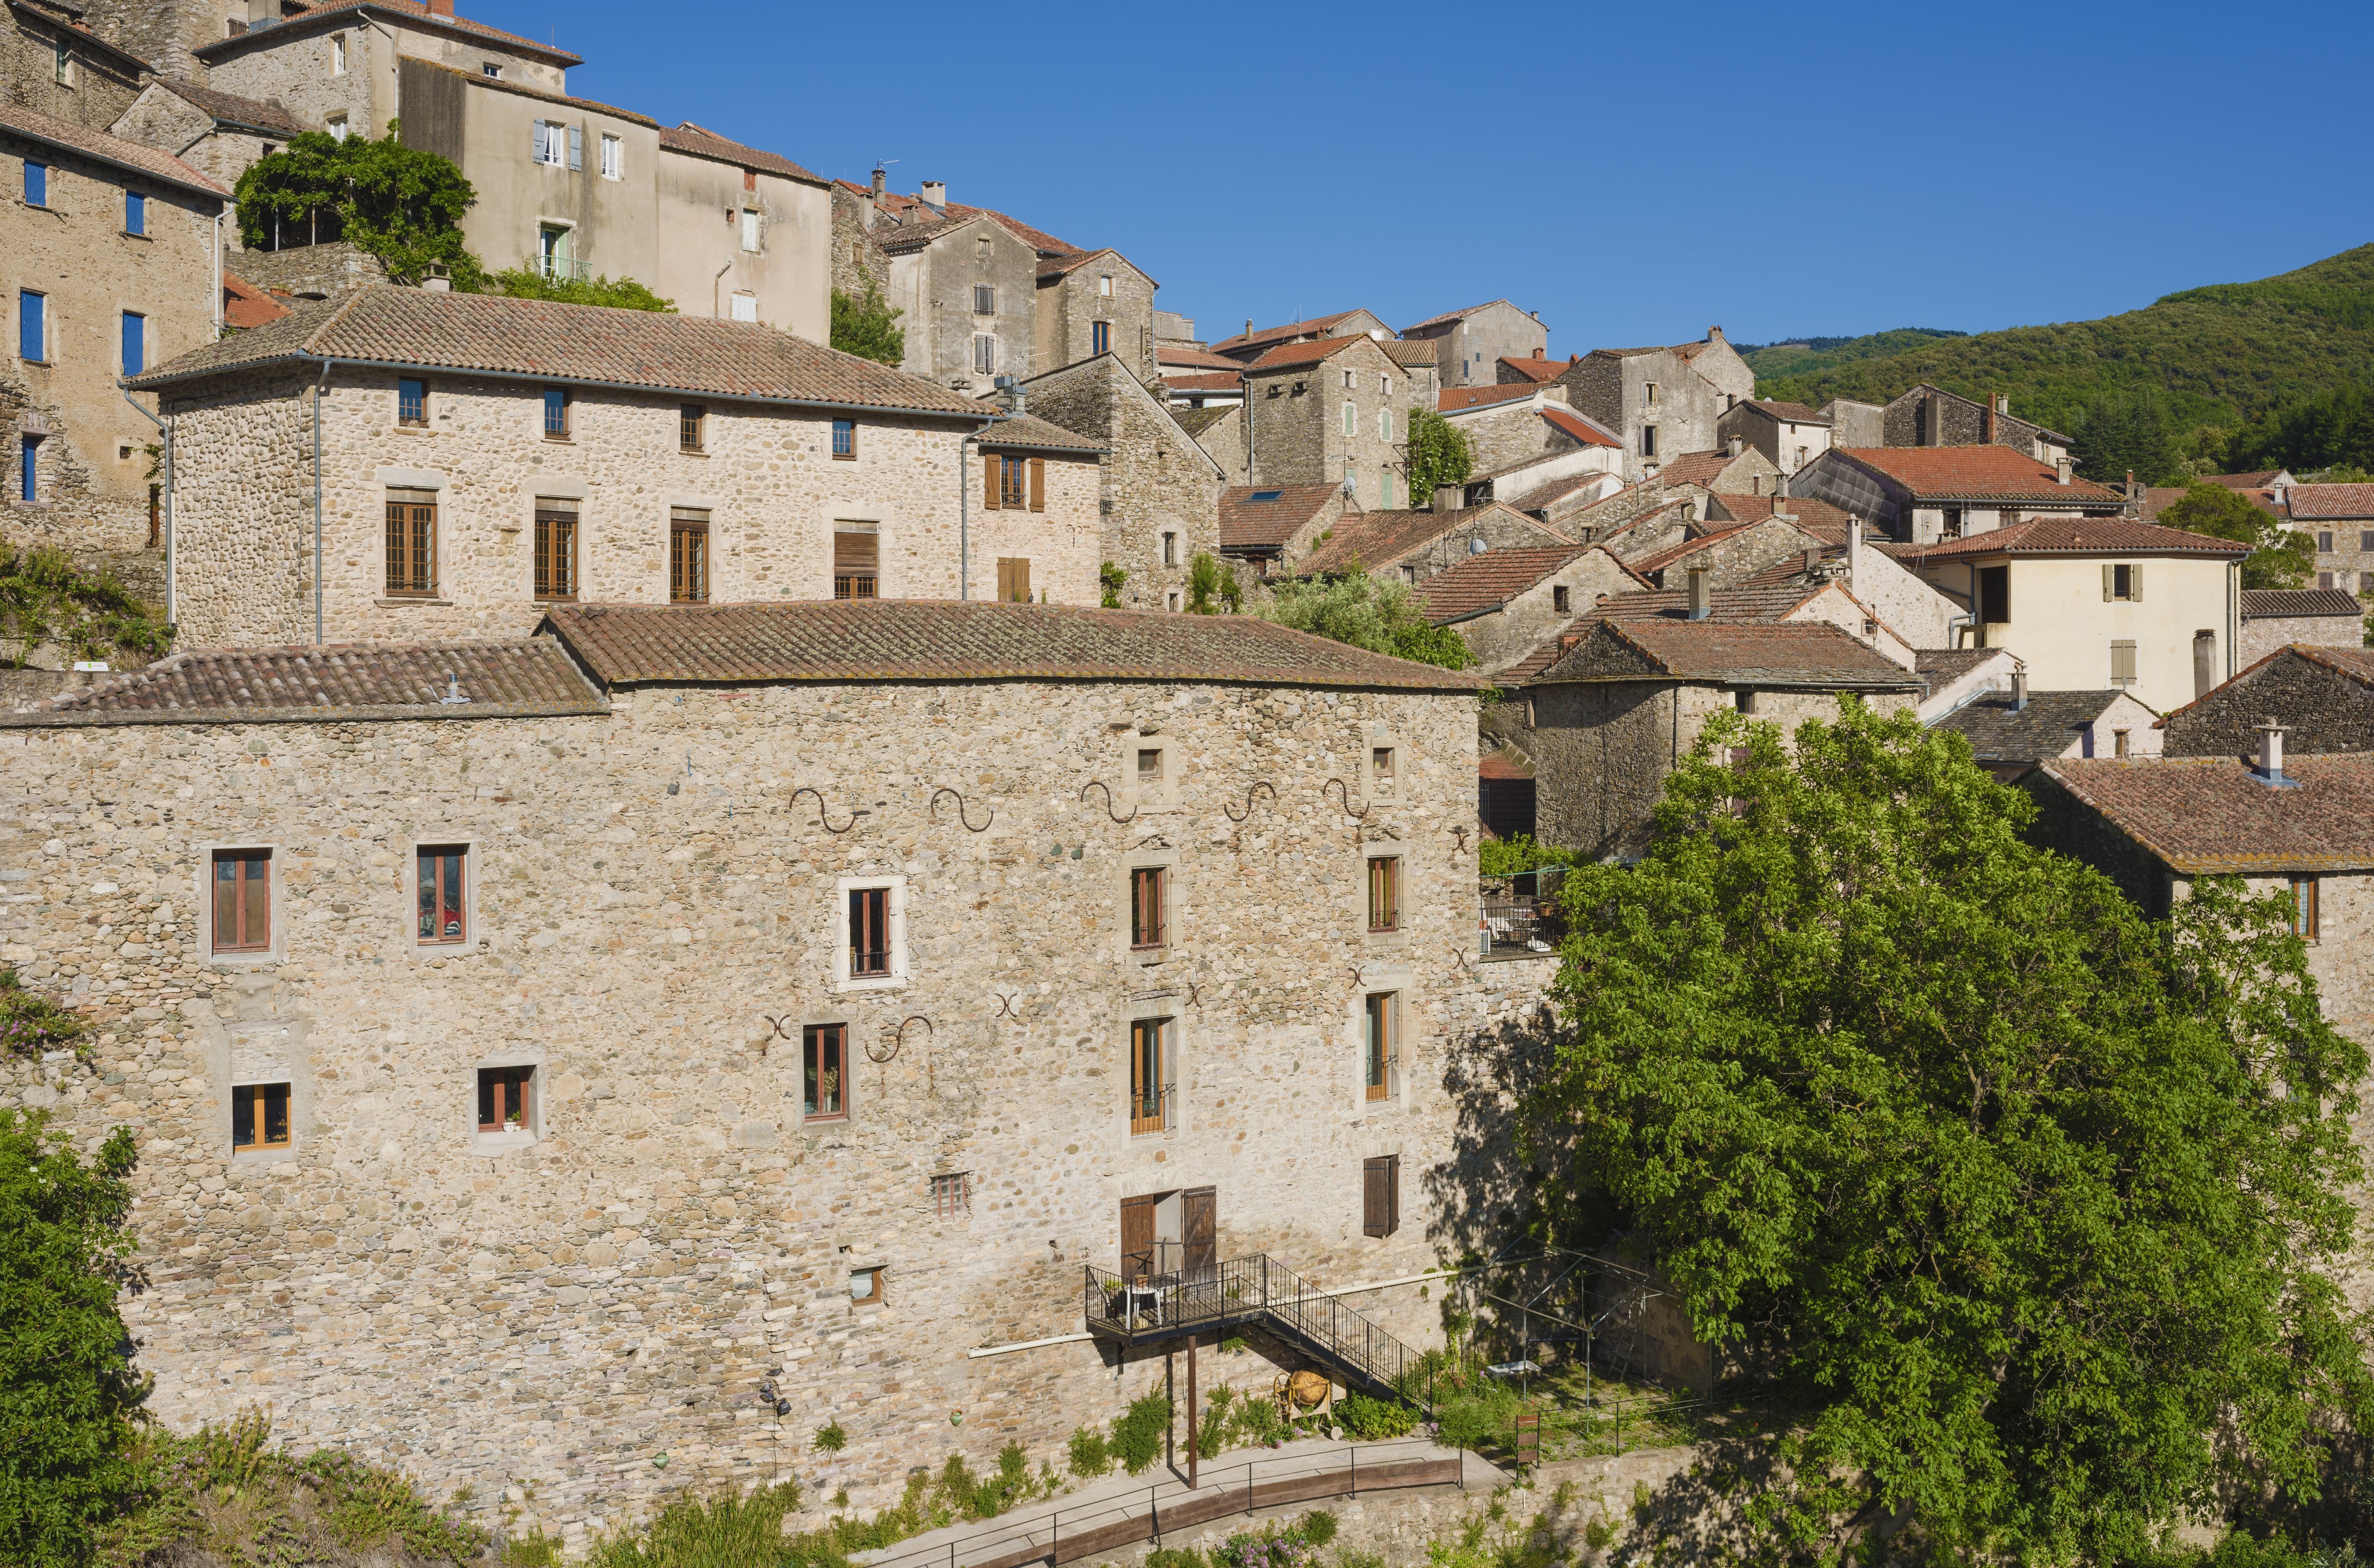 Building in Olargues, Hérault 02